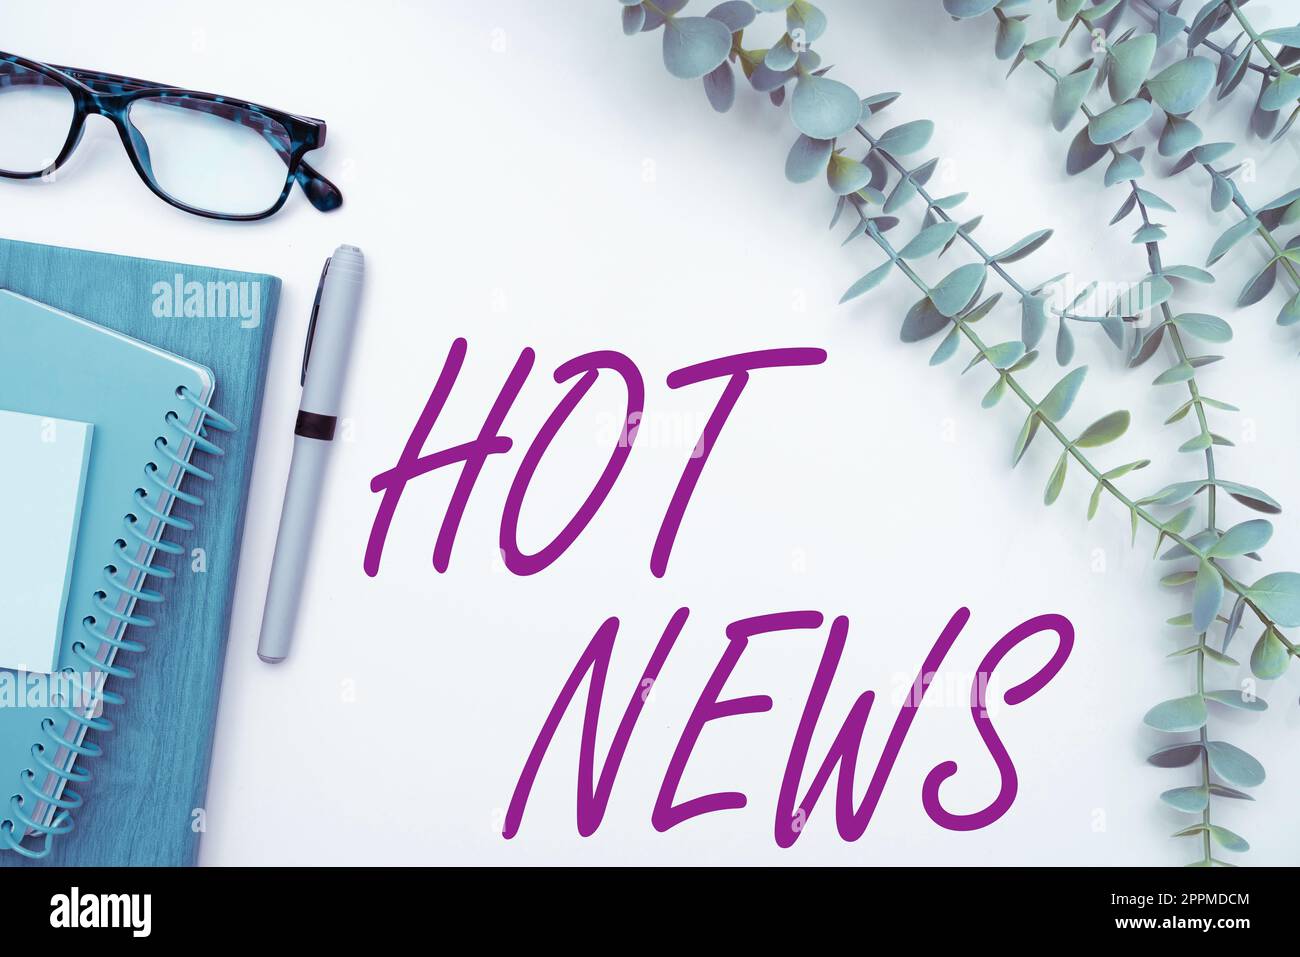 Sign displaying Hot News. Business approach subject that experiences surge in popularity on social media Stock Photo